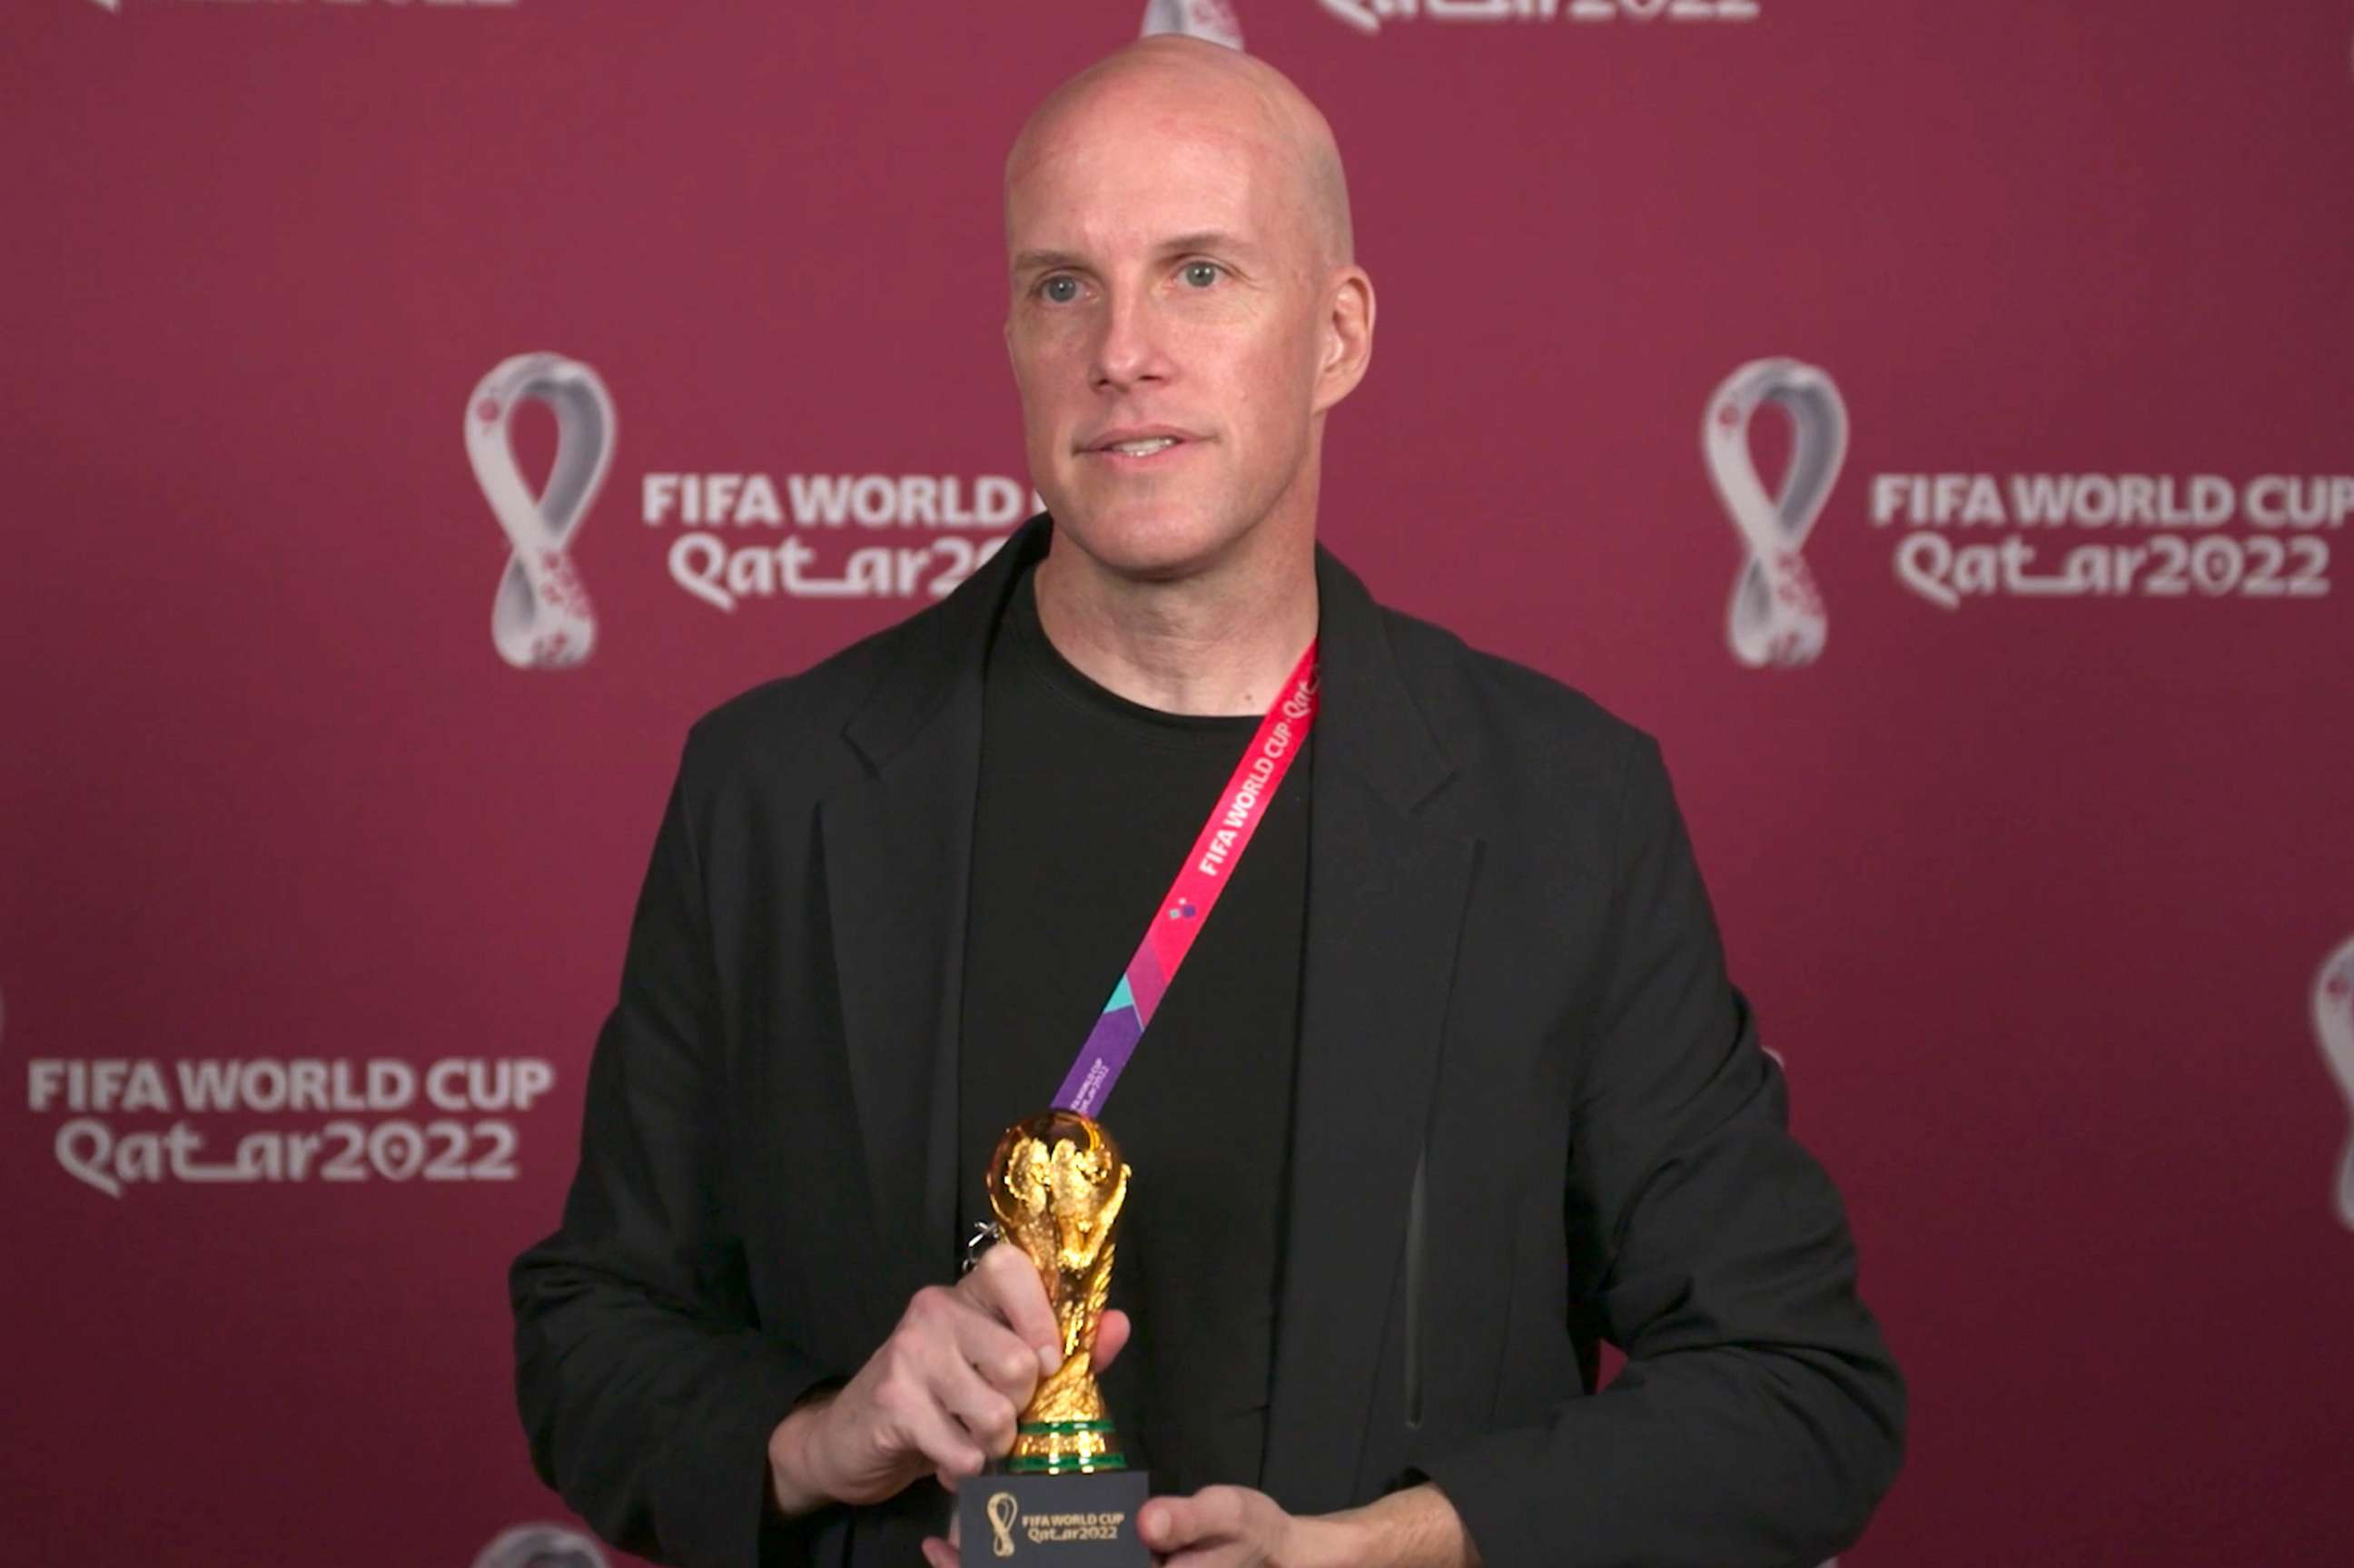 PHOTO: Journalist Grant Wahl attends an awards ceremony at the World Cup,in Doha, Qatar. Nov. 2022.